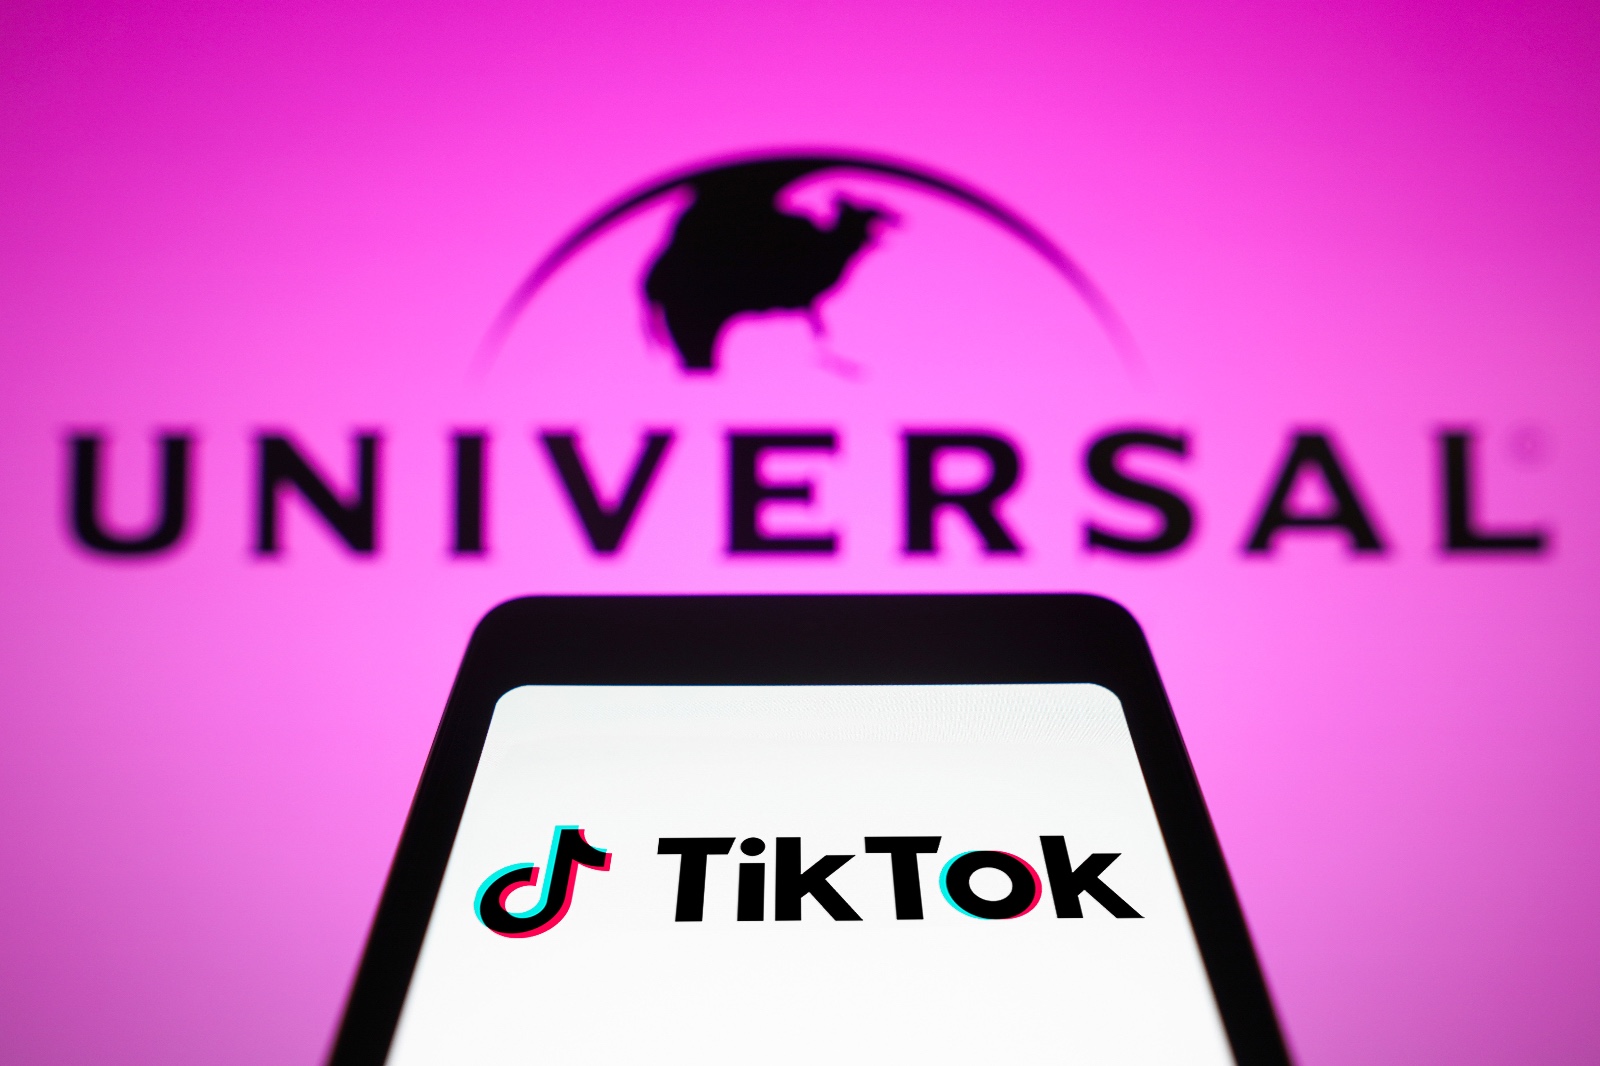 Tiktok logo at the front, Universal logo at the back